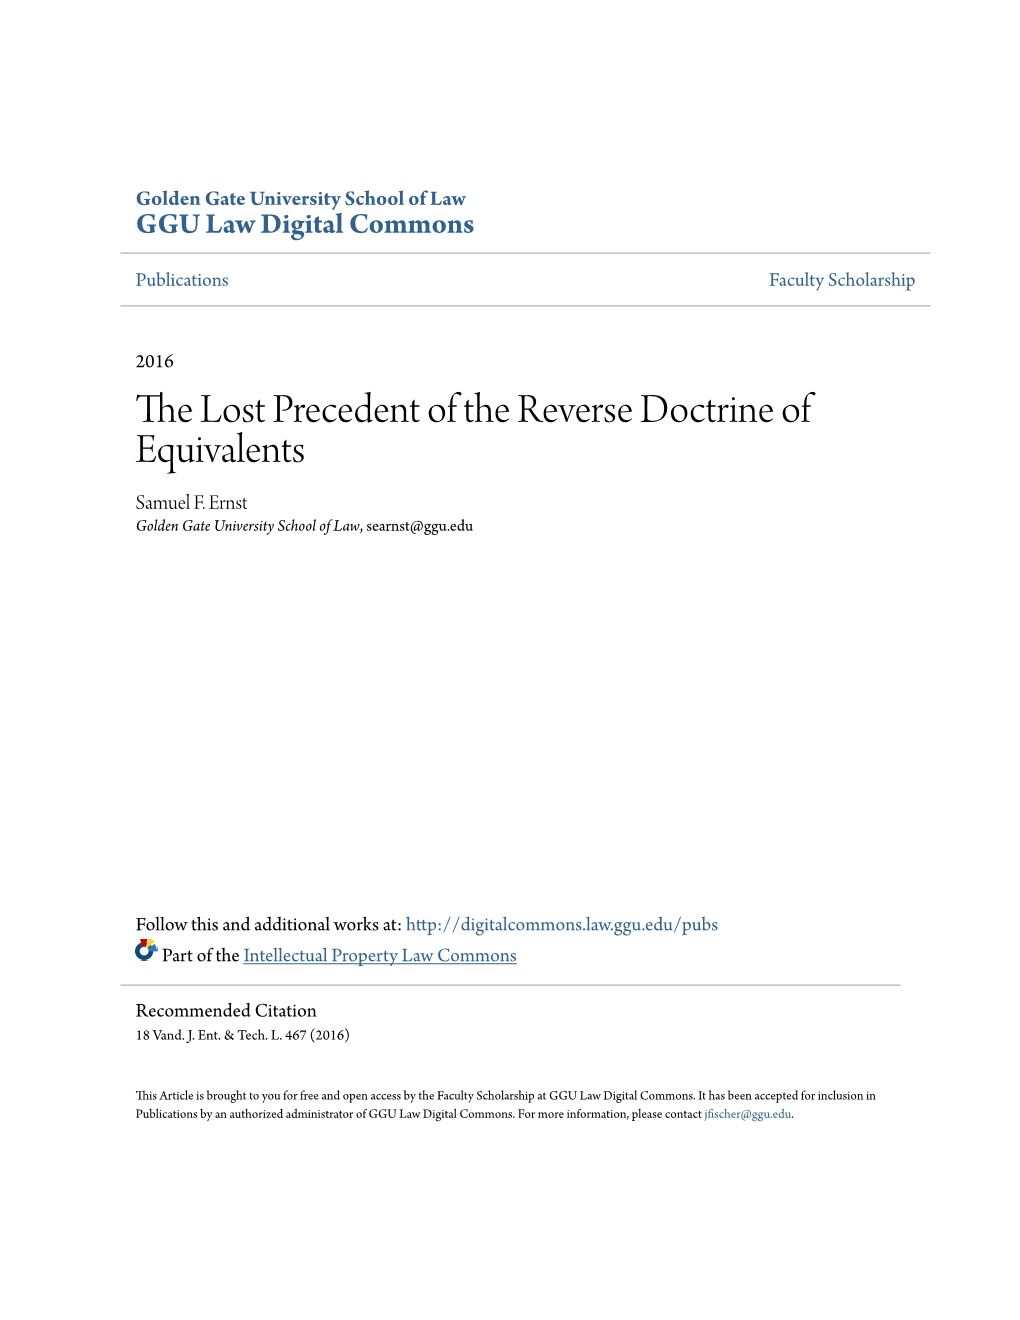 The Lost Precedent of the Reverse Doctrine of Equivalents Samuel F